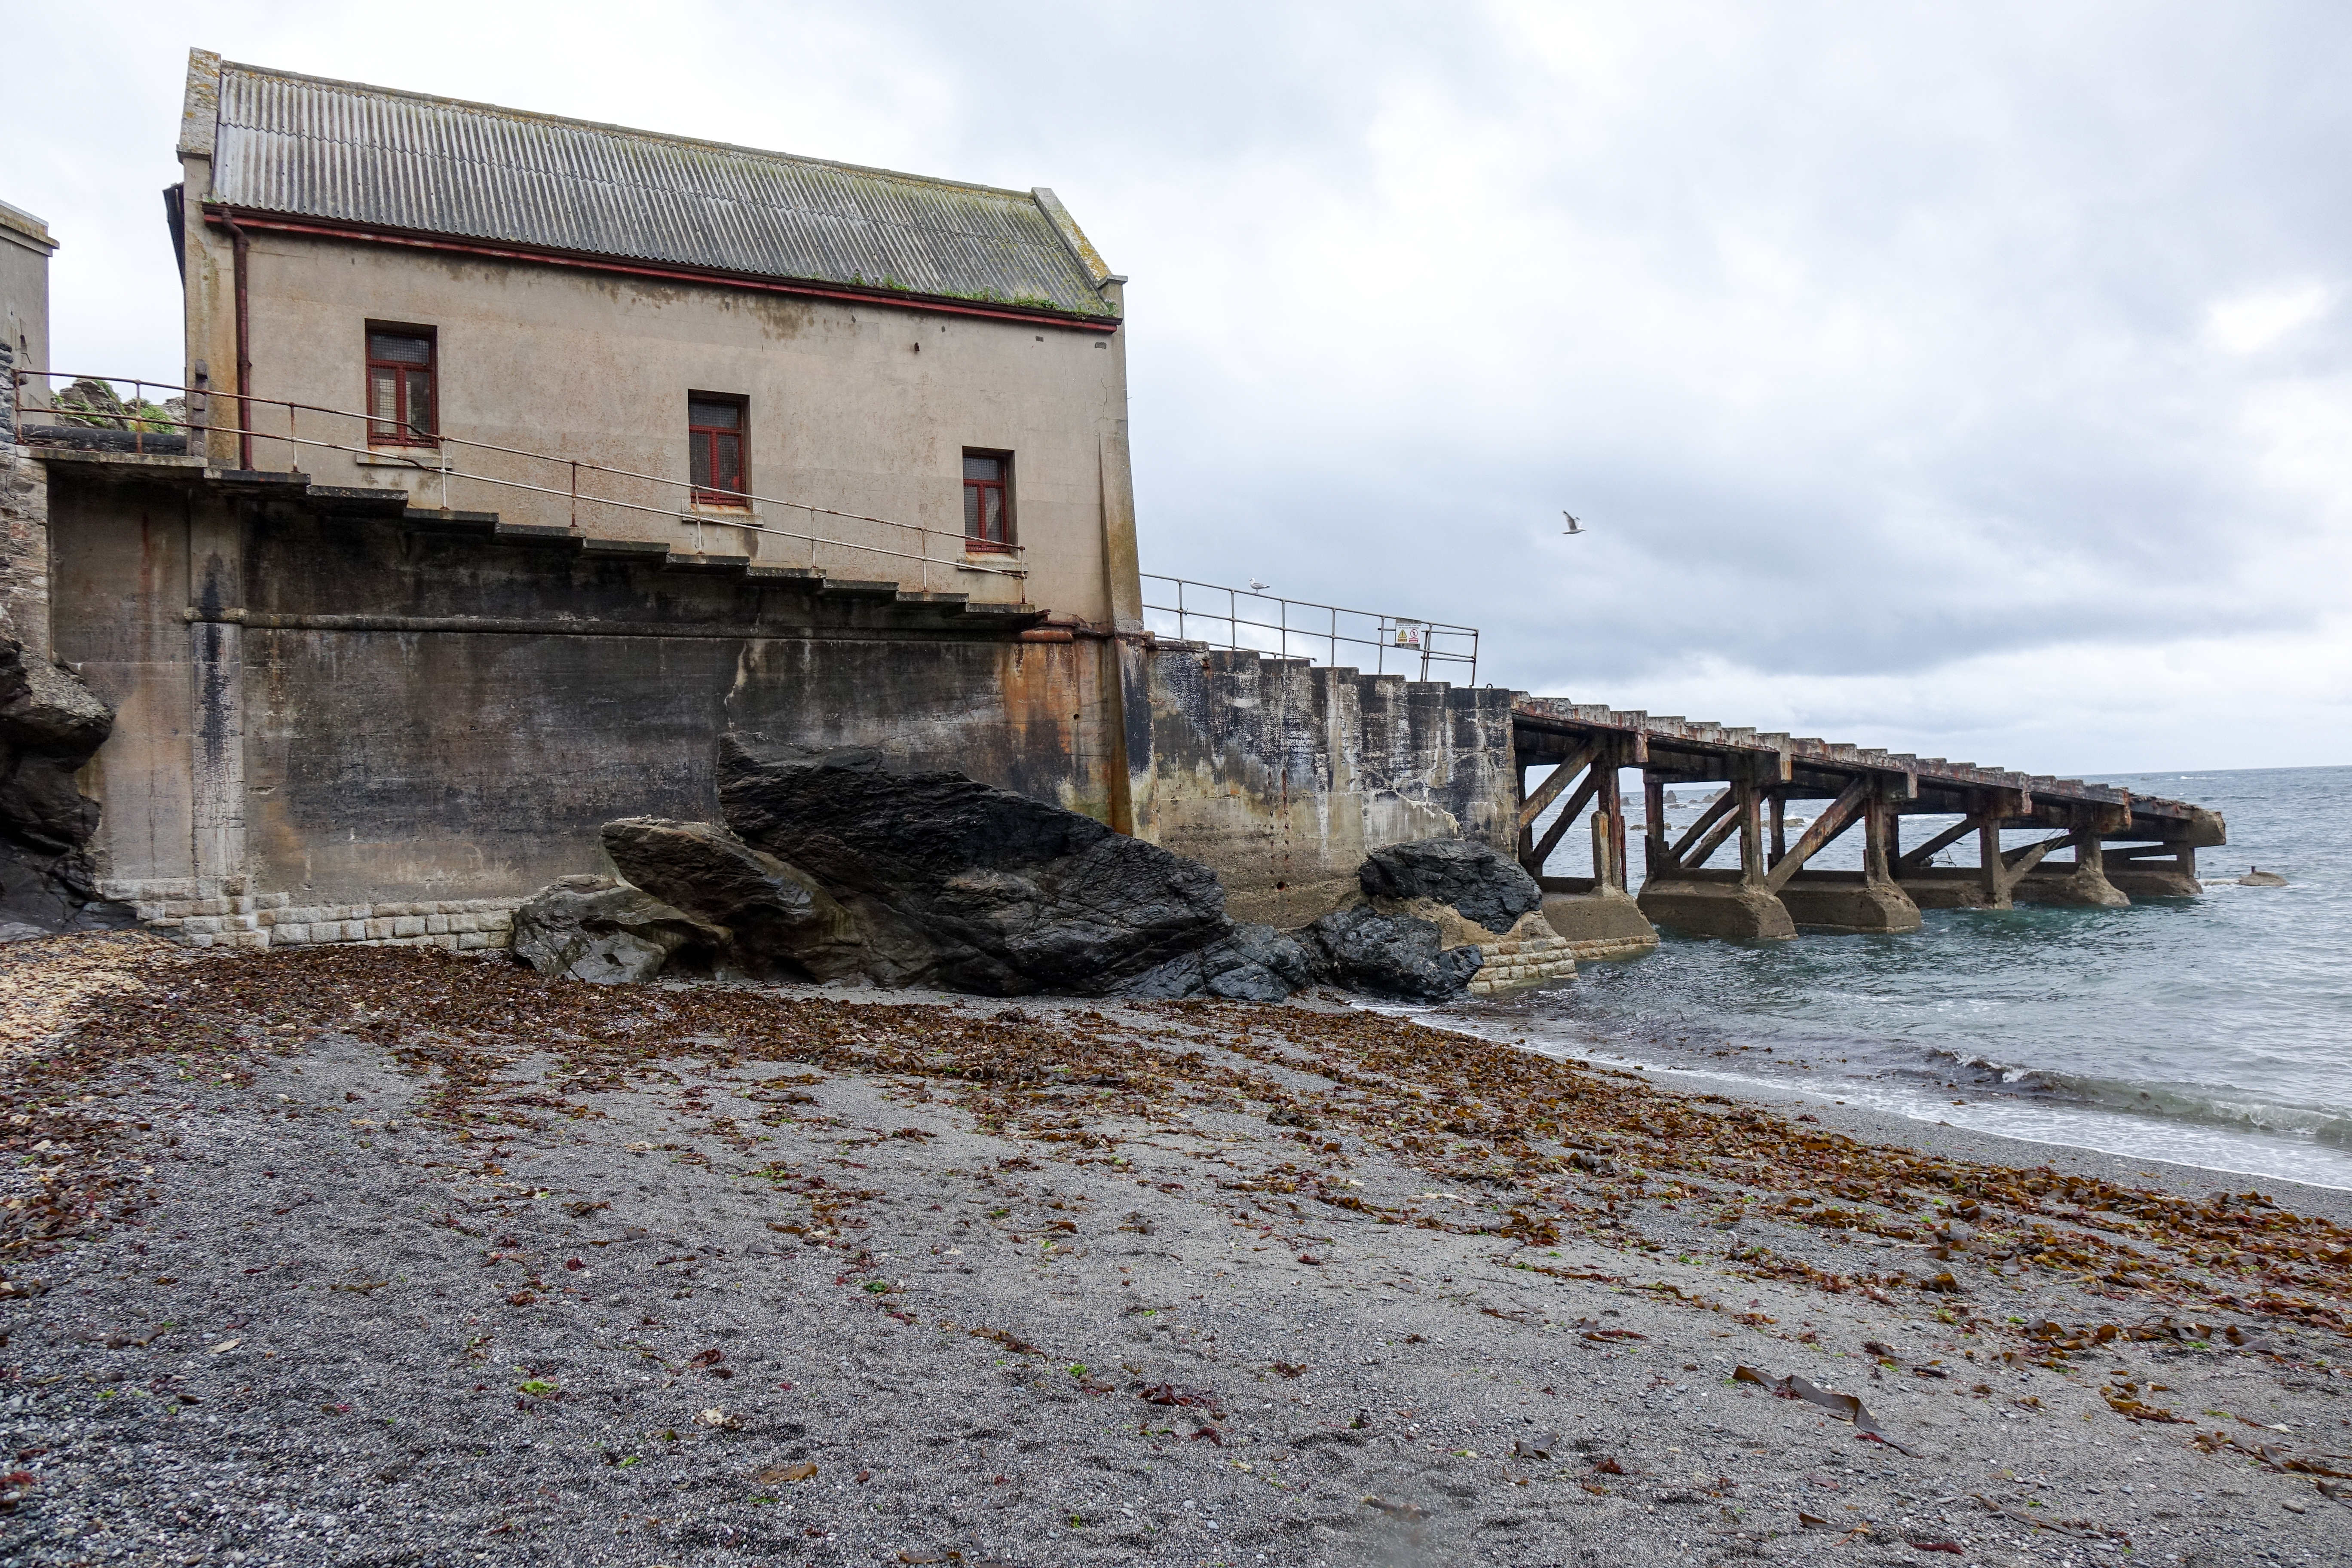 The old lifeboat station